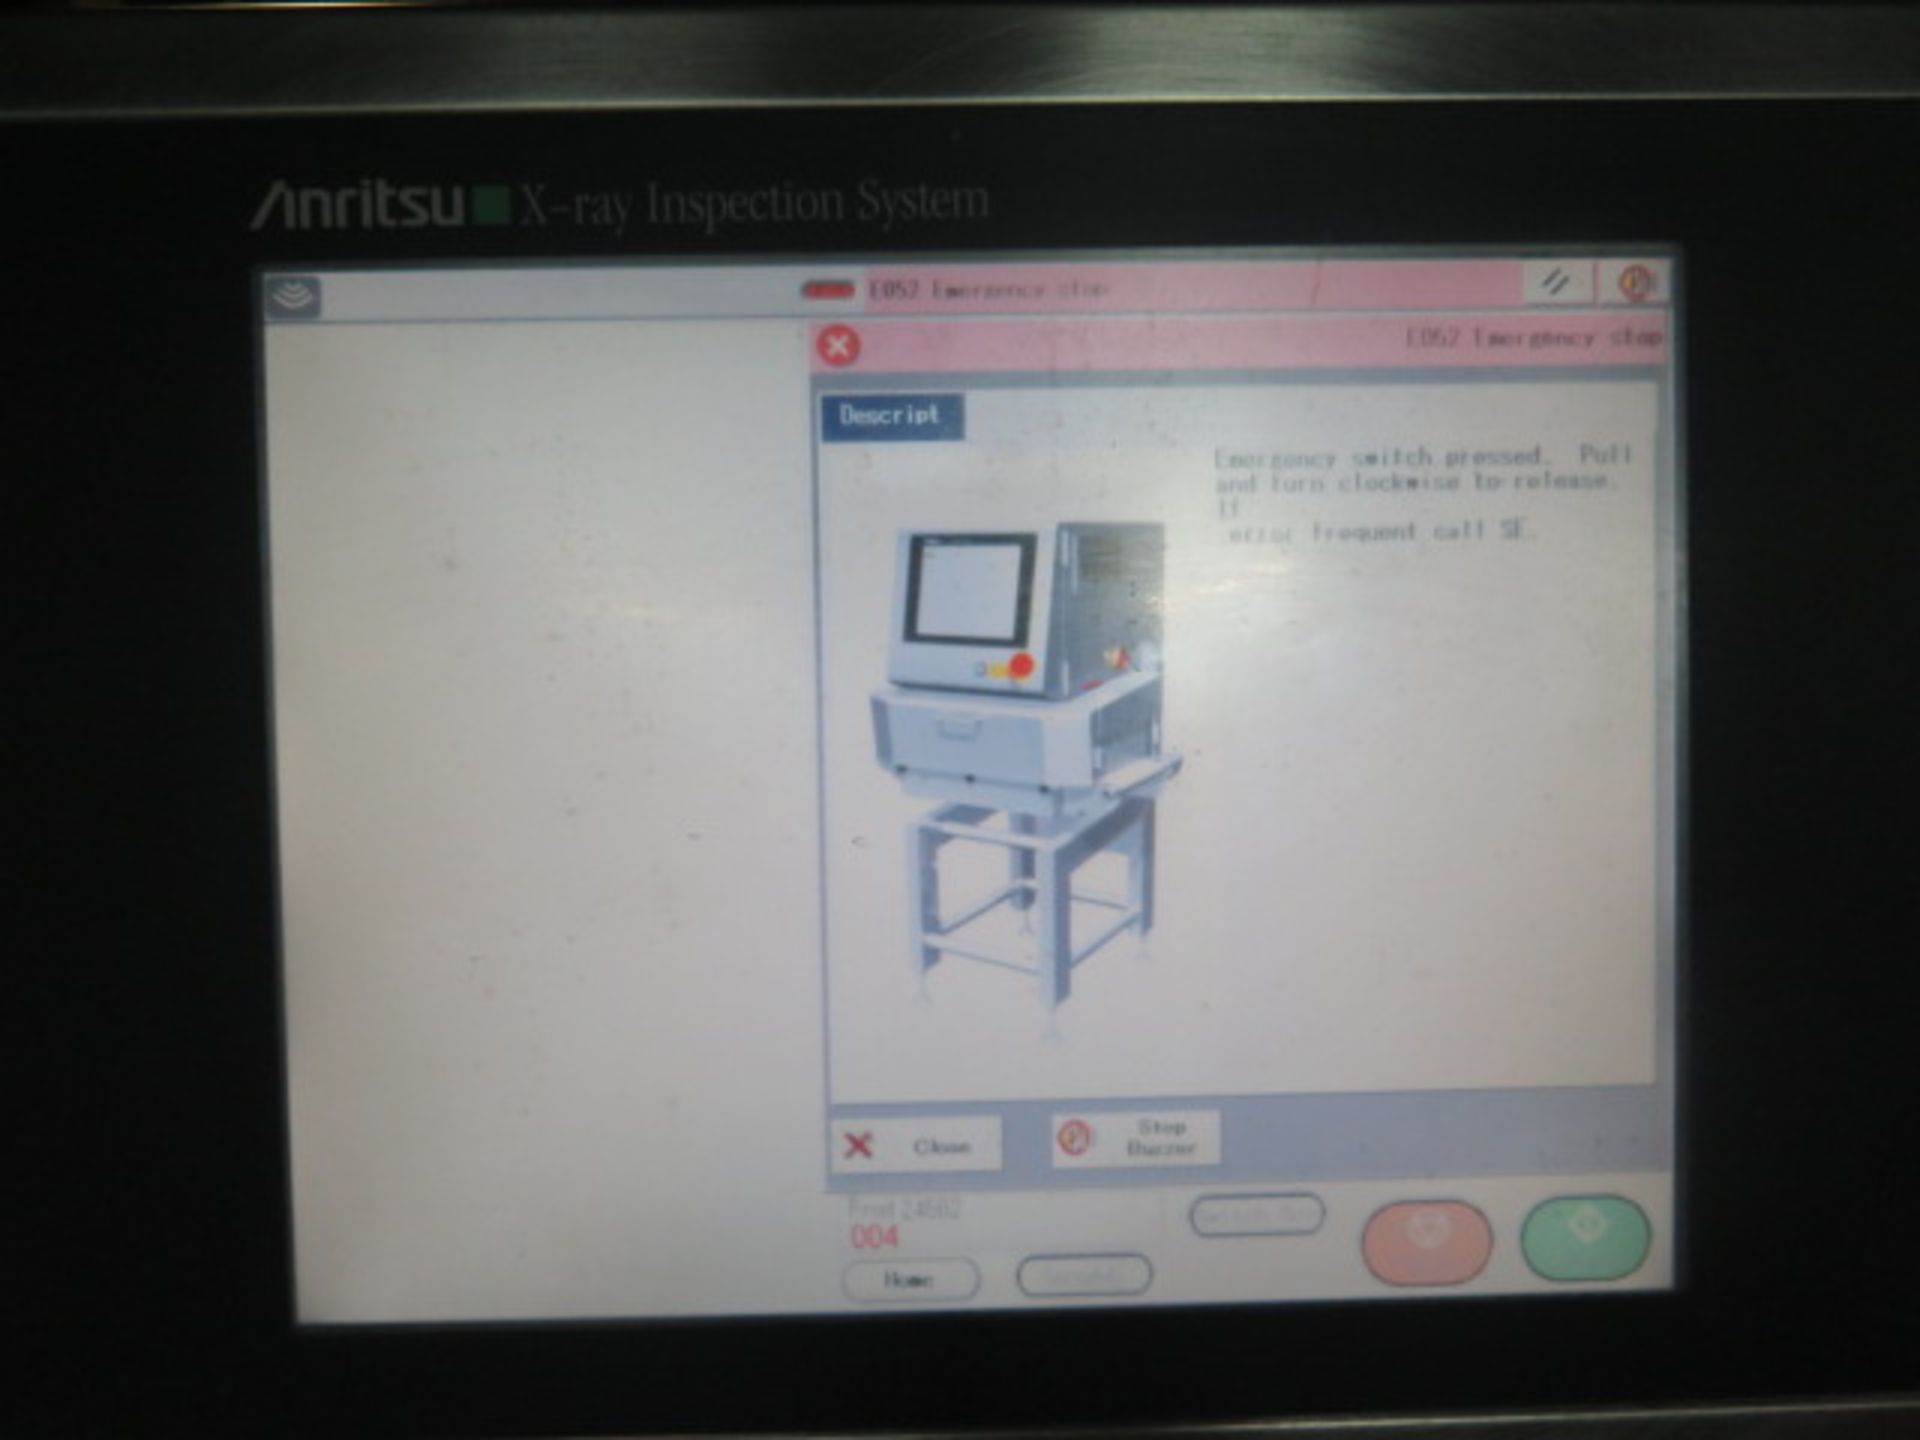 Anritsu Industrial Solutions mdl. KD7416AWH X-Ray Inspection System s/n 4600154582 w/ Touch-Screen - Image 6 of 7